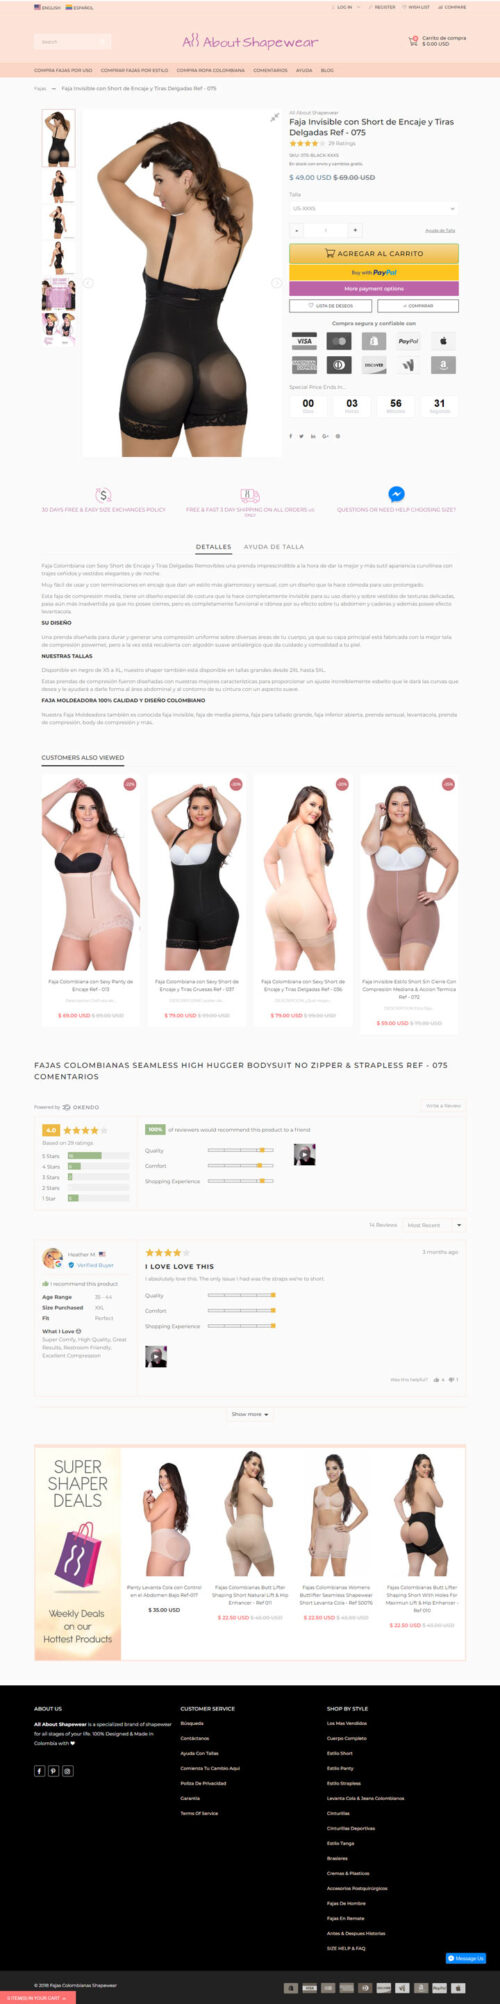 shop and product content design all about shapewear